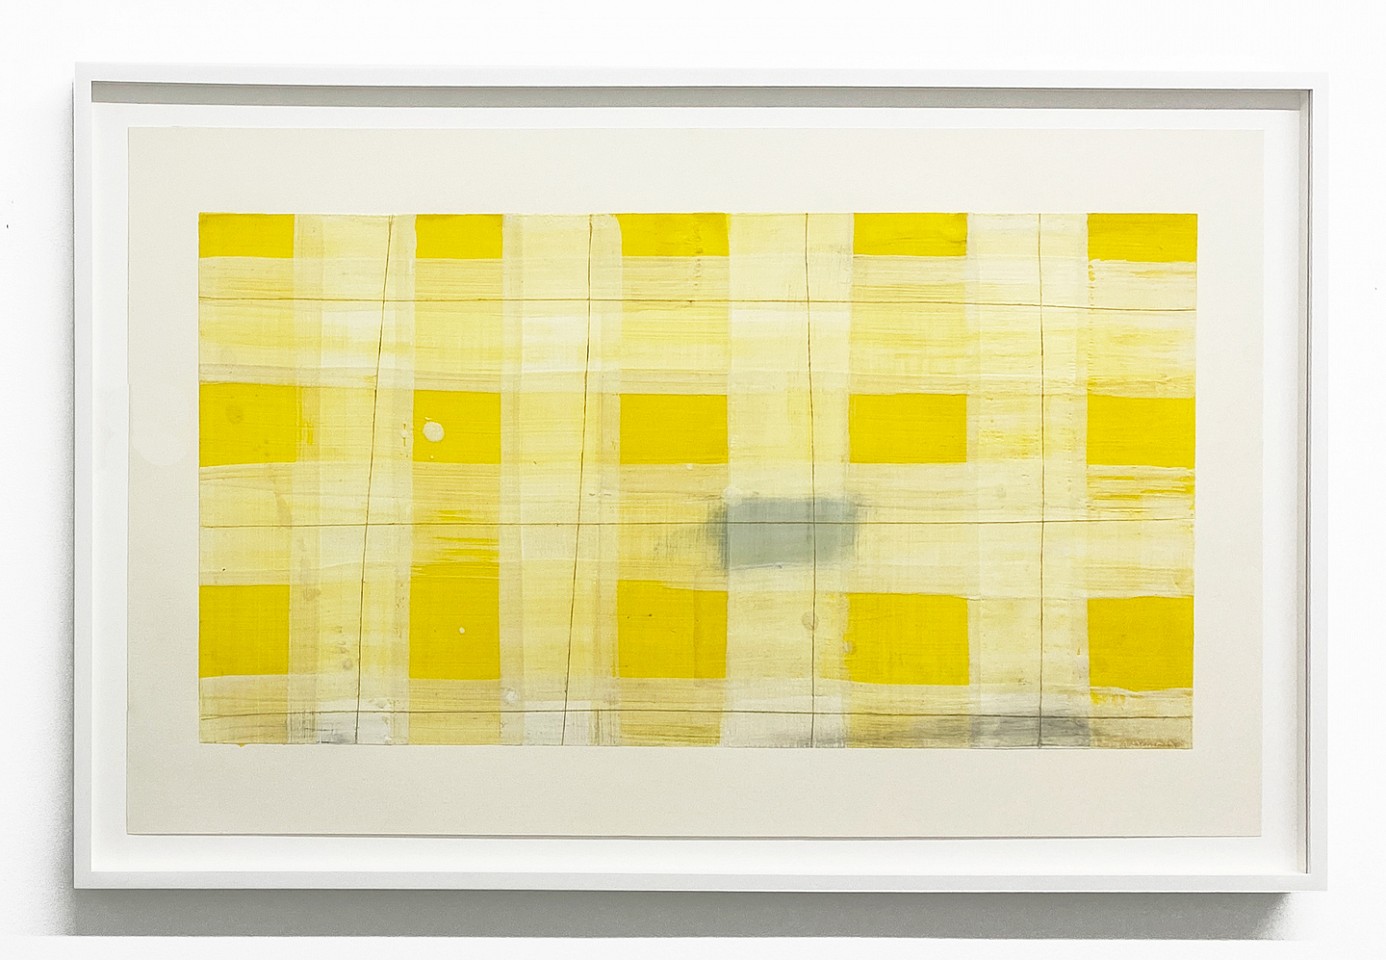 Don Maynard
Yellow Grid with Smoke, 2021
MAY416
encaustic on paper, 20 x 33 inches paper / 15 x 29 inches image / 23 1/4 x 35 3/4 inches framed